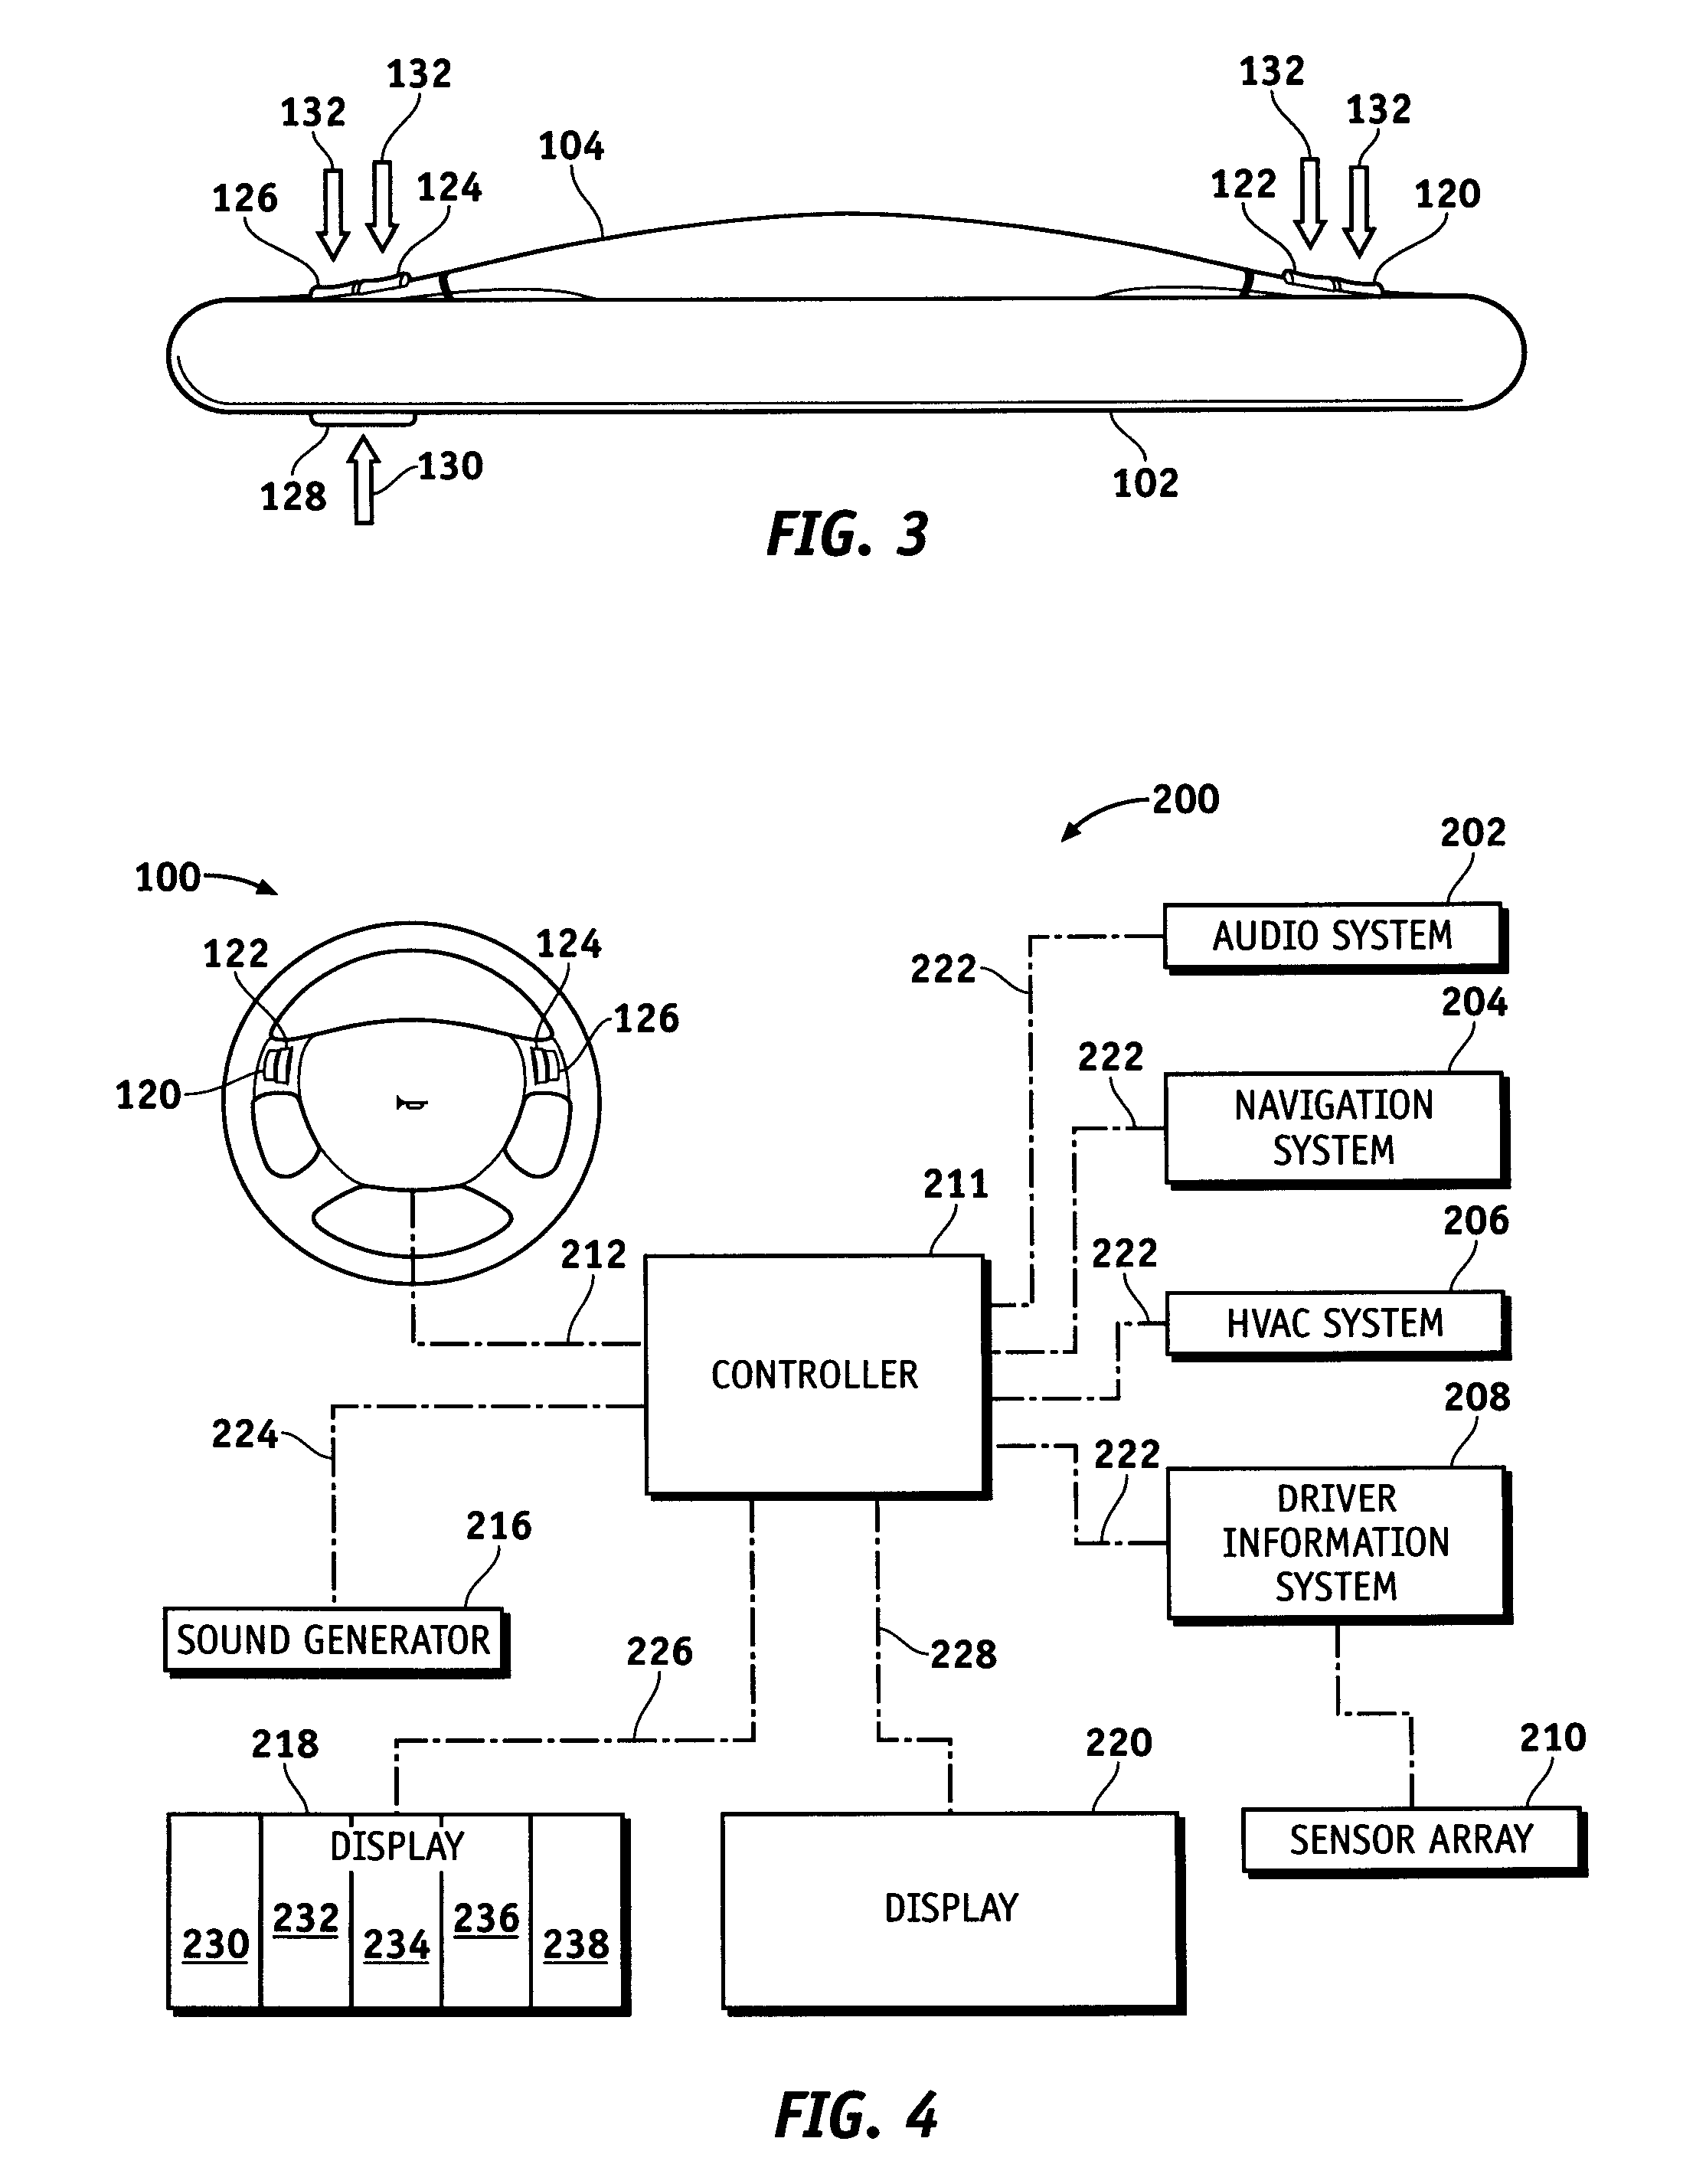 Vehicular Interface Including Steering Wheel Control Assembly